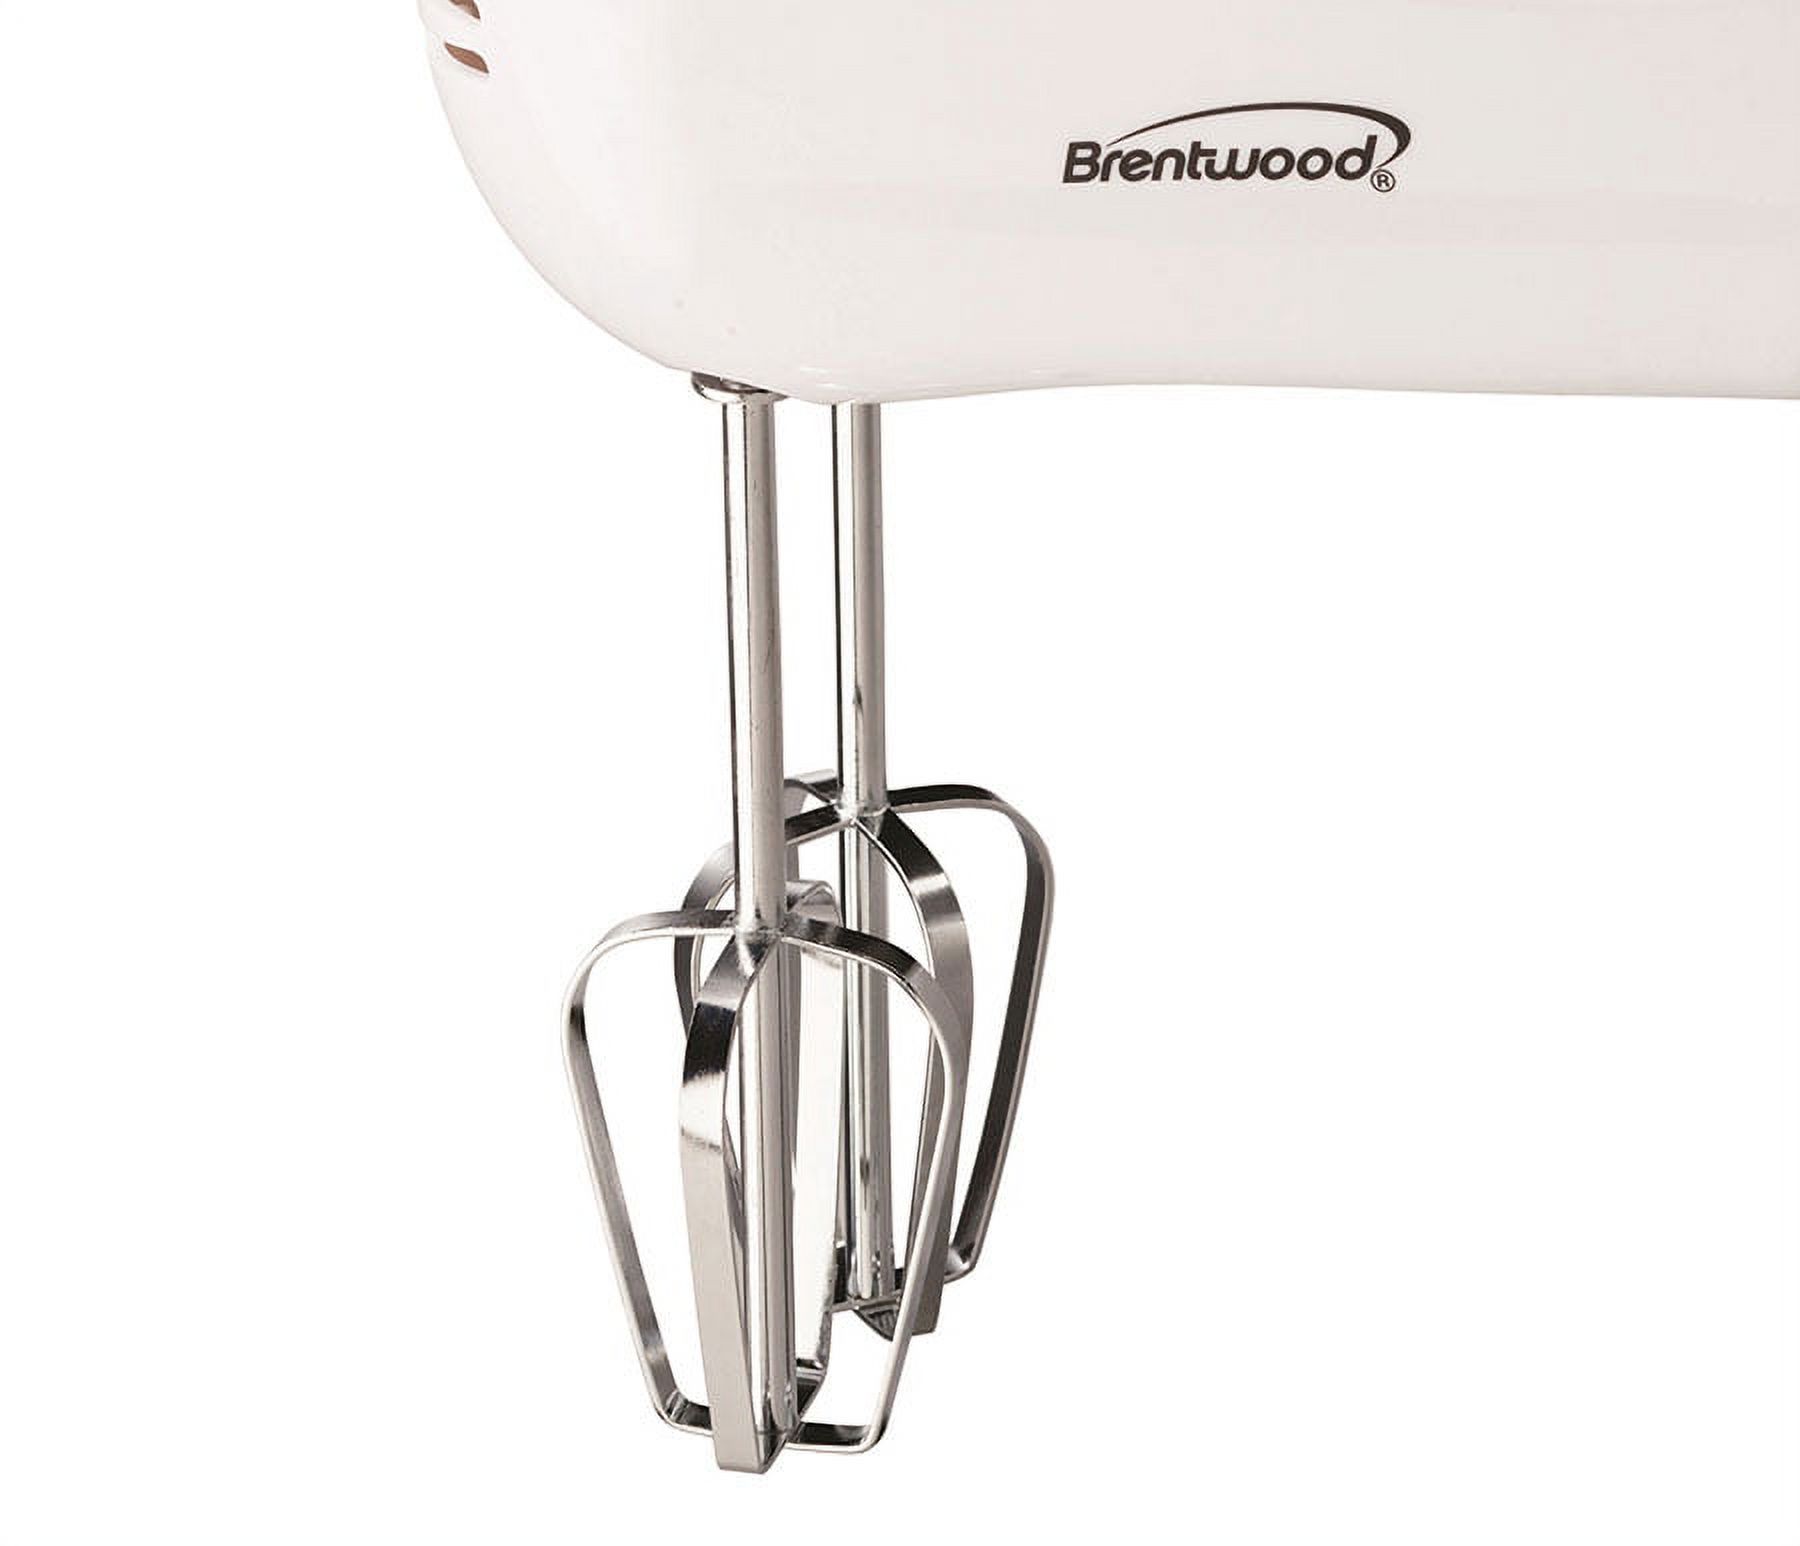 Brentwood HM-45 Lightweight 5-Speed Electric Hand Mixer, White - image 5 of 8